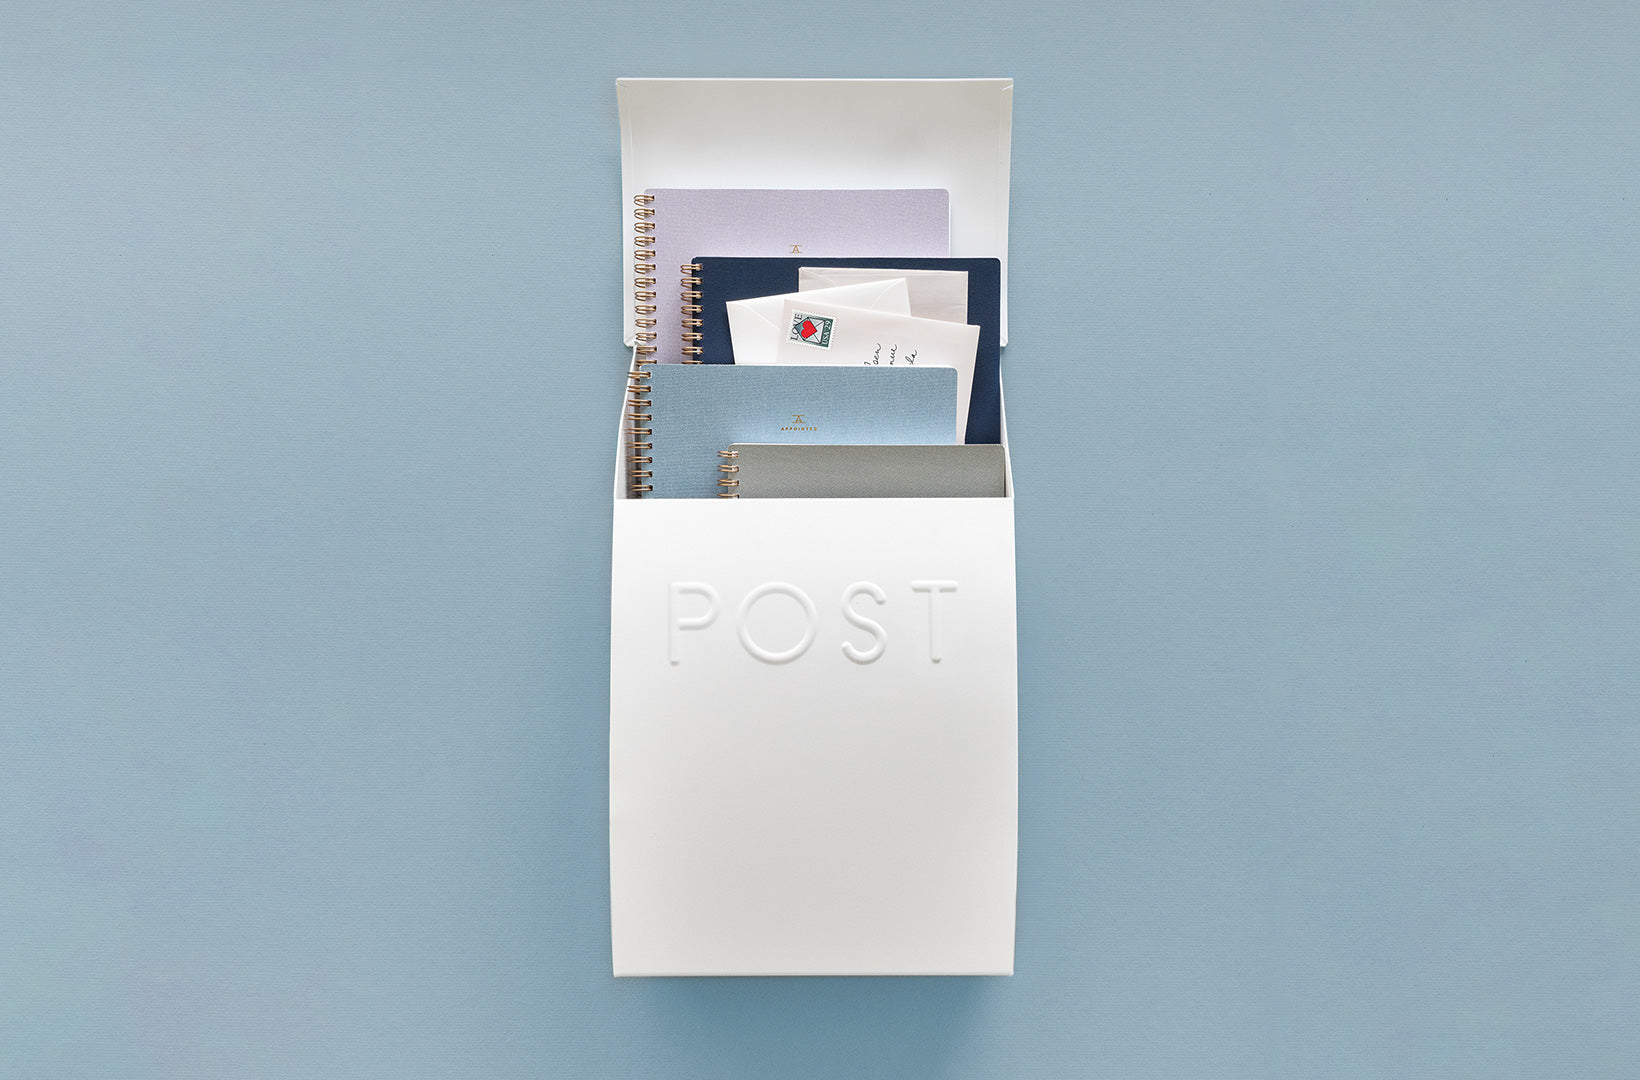 A white mailbox hinges open at the lid, revealing copious letters and notebooks inside. The mailbox is vertical and sits against a blue-gray wall.